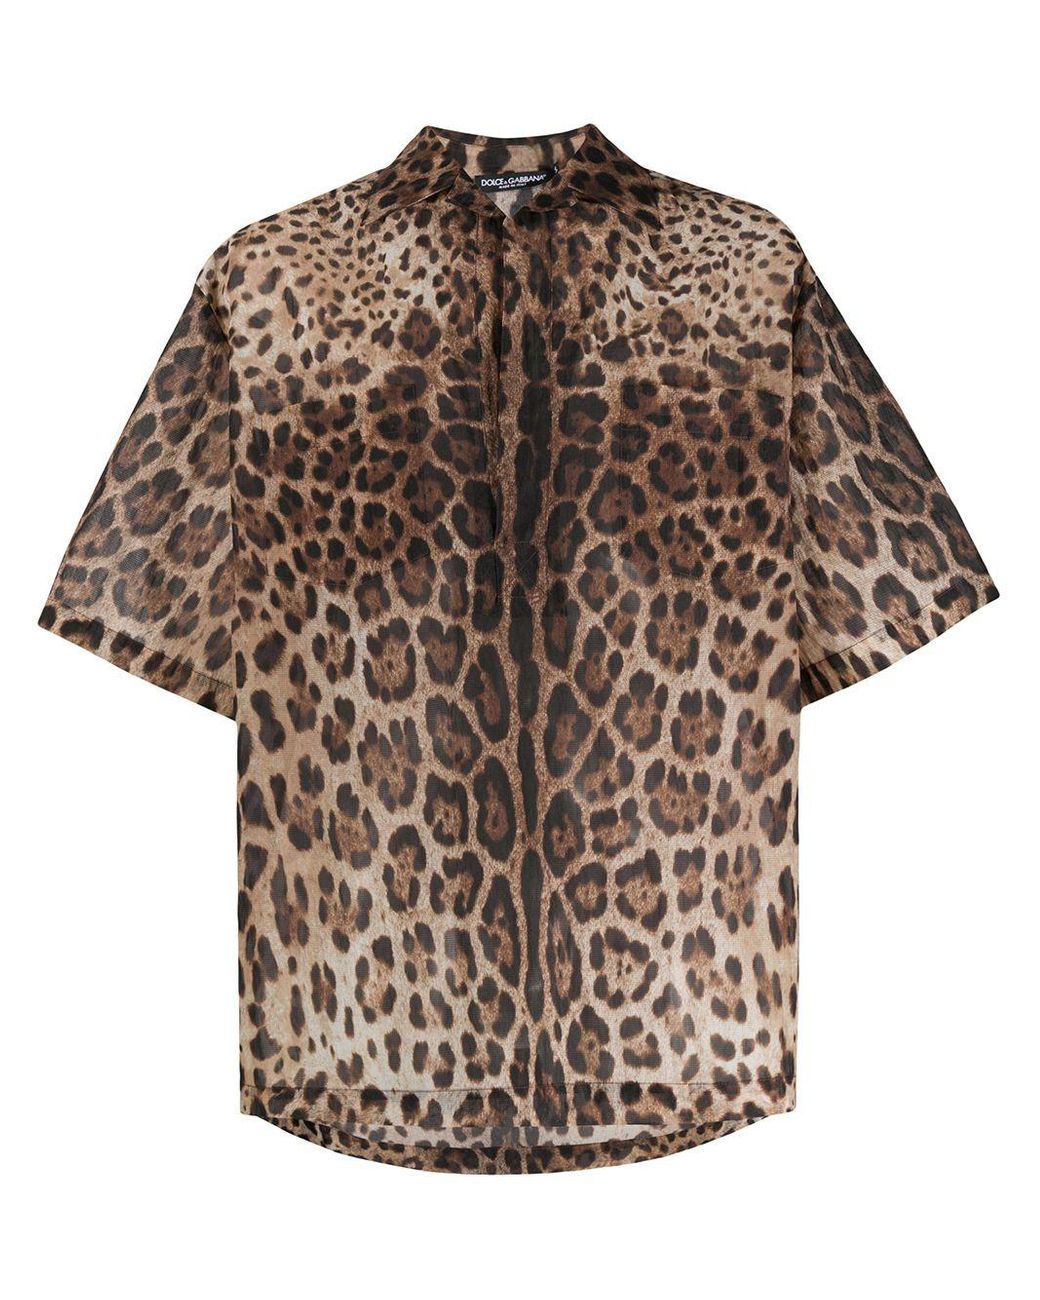 Dolce & Gabbana Leopard Print Bowling Shirt in Brown for Men - Save 24% ...